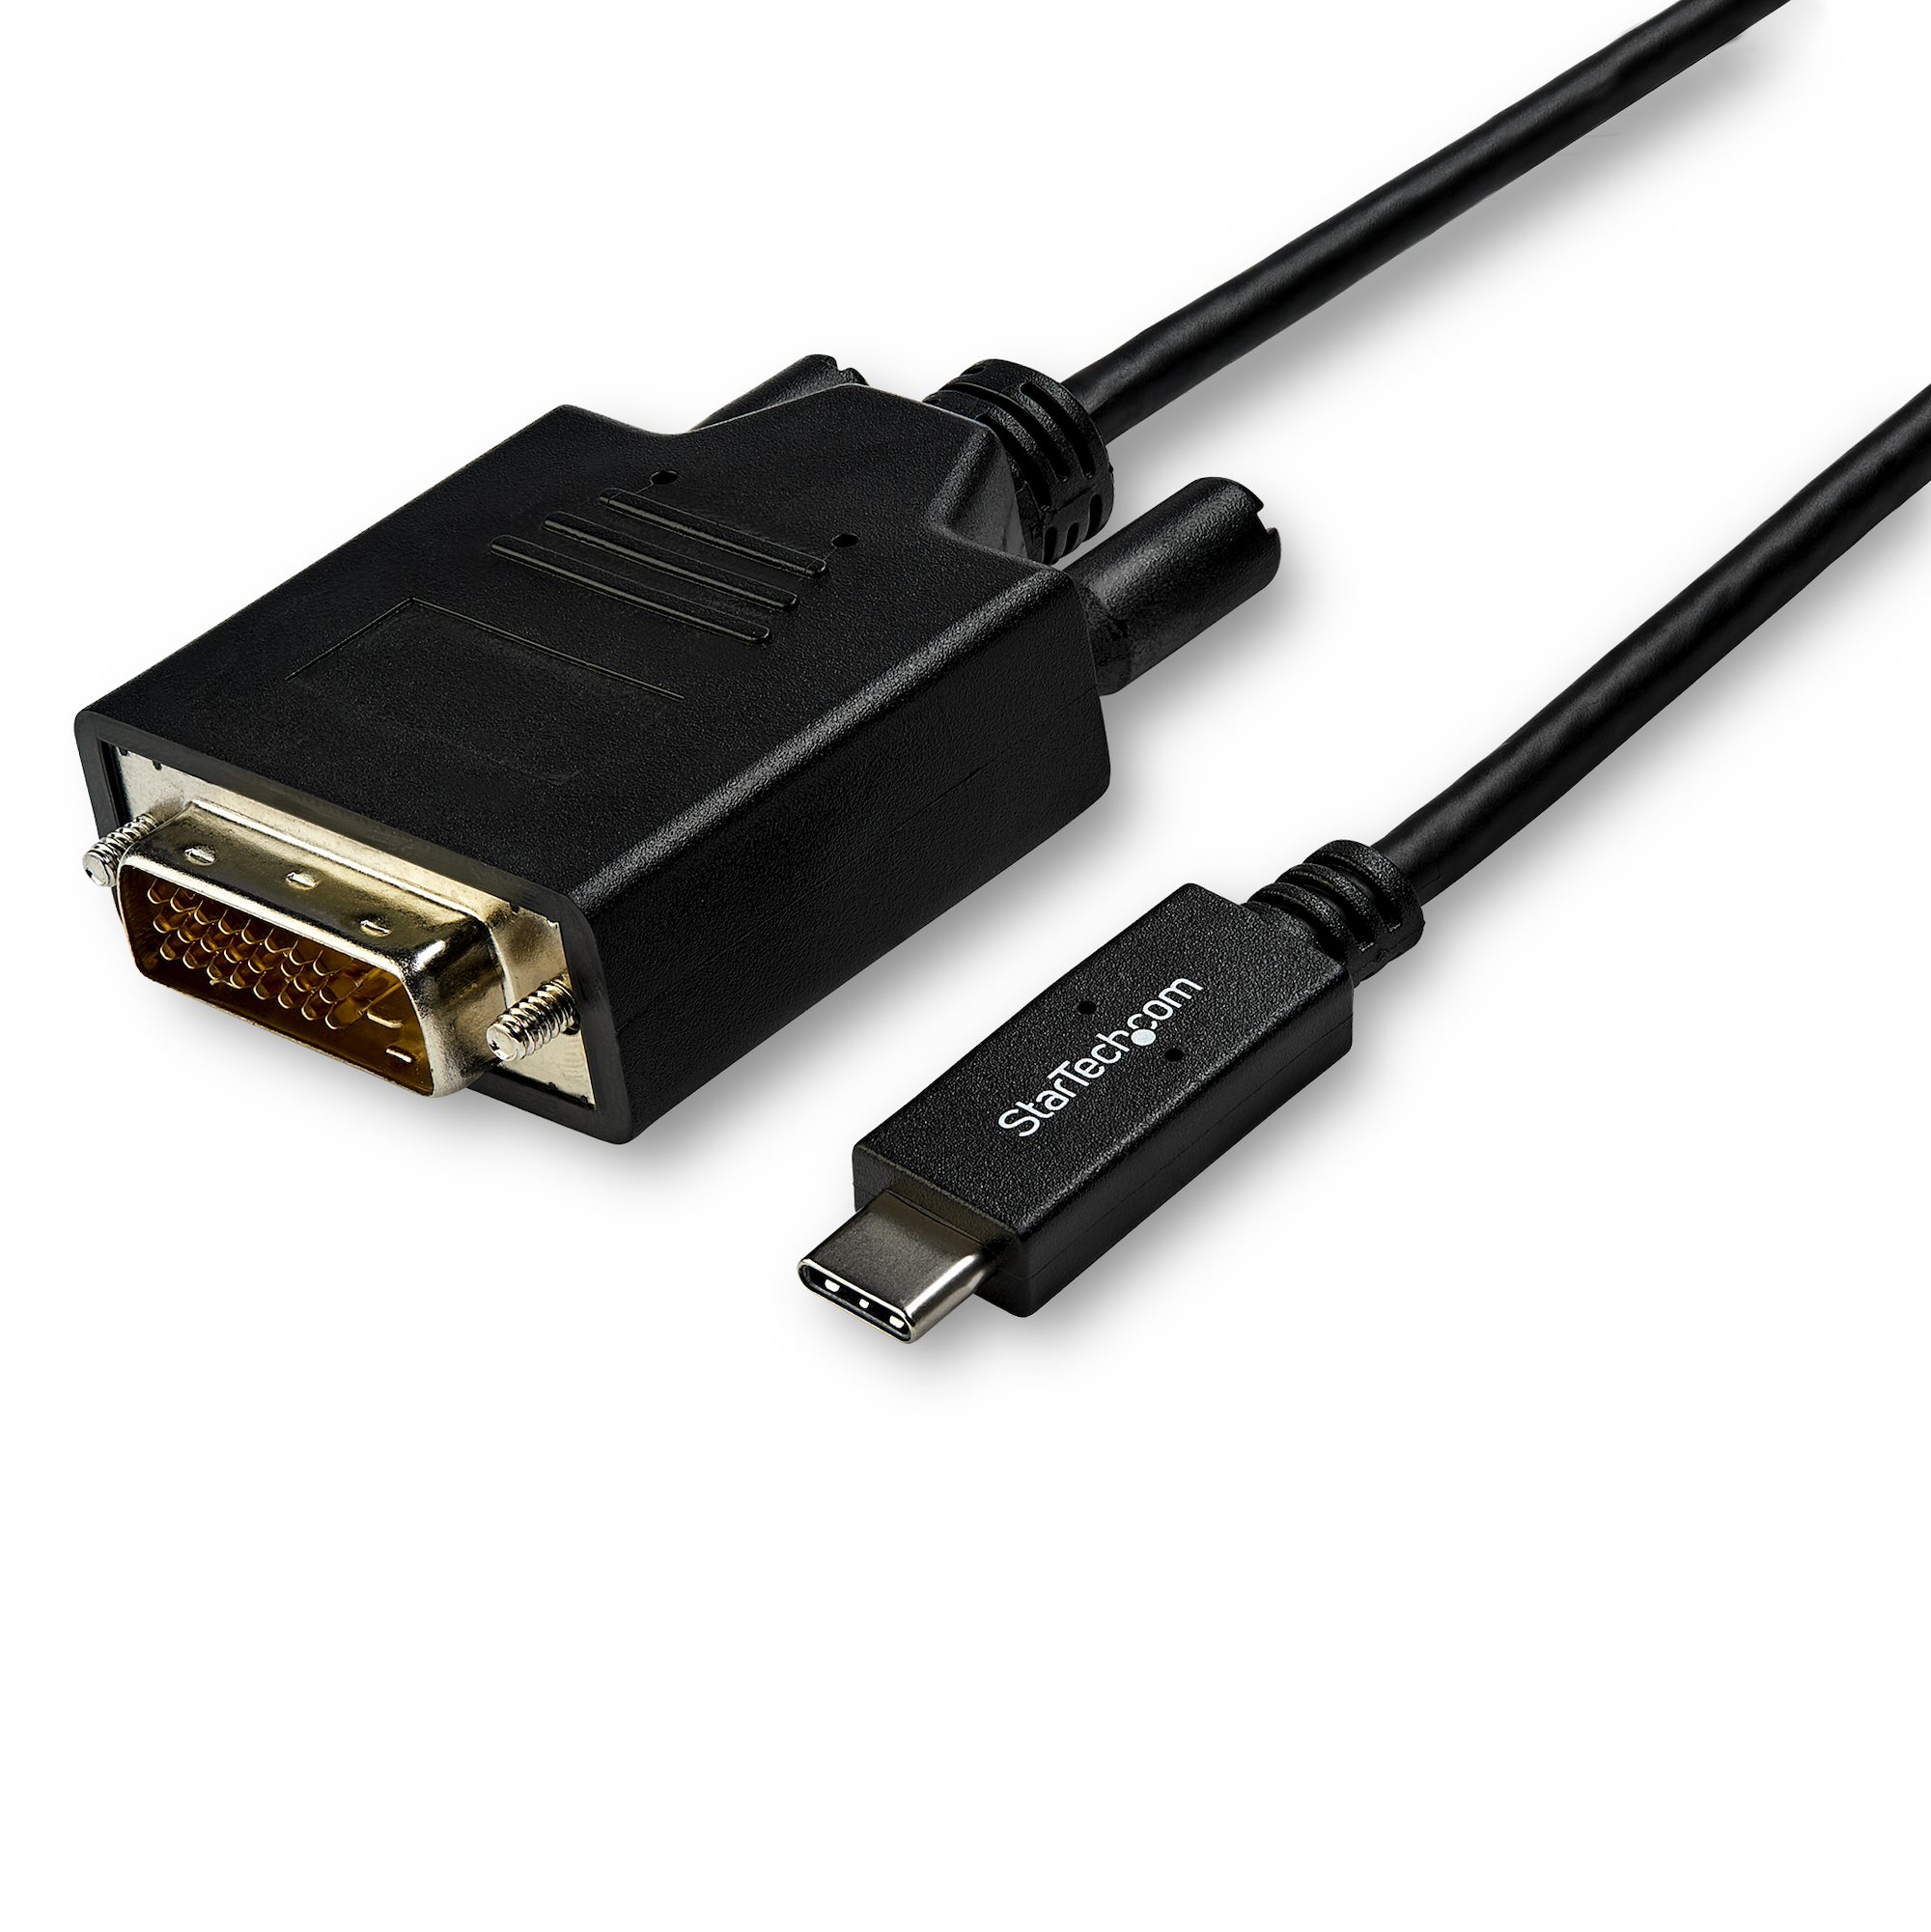 Bugsering Skøn aIDS 10ft USB C to DVI Cable Adapter - 1080p - USB-C Display Adapters |  StarTech.com Belgium